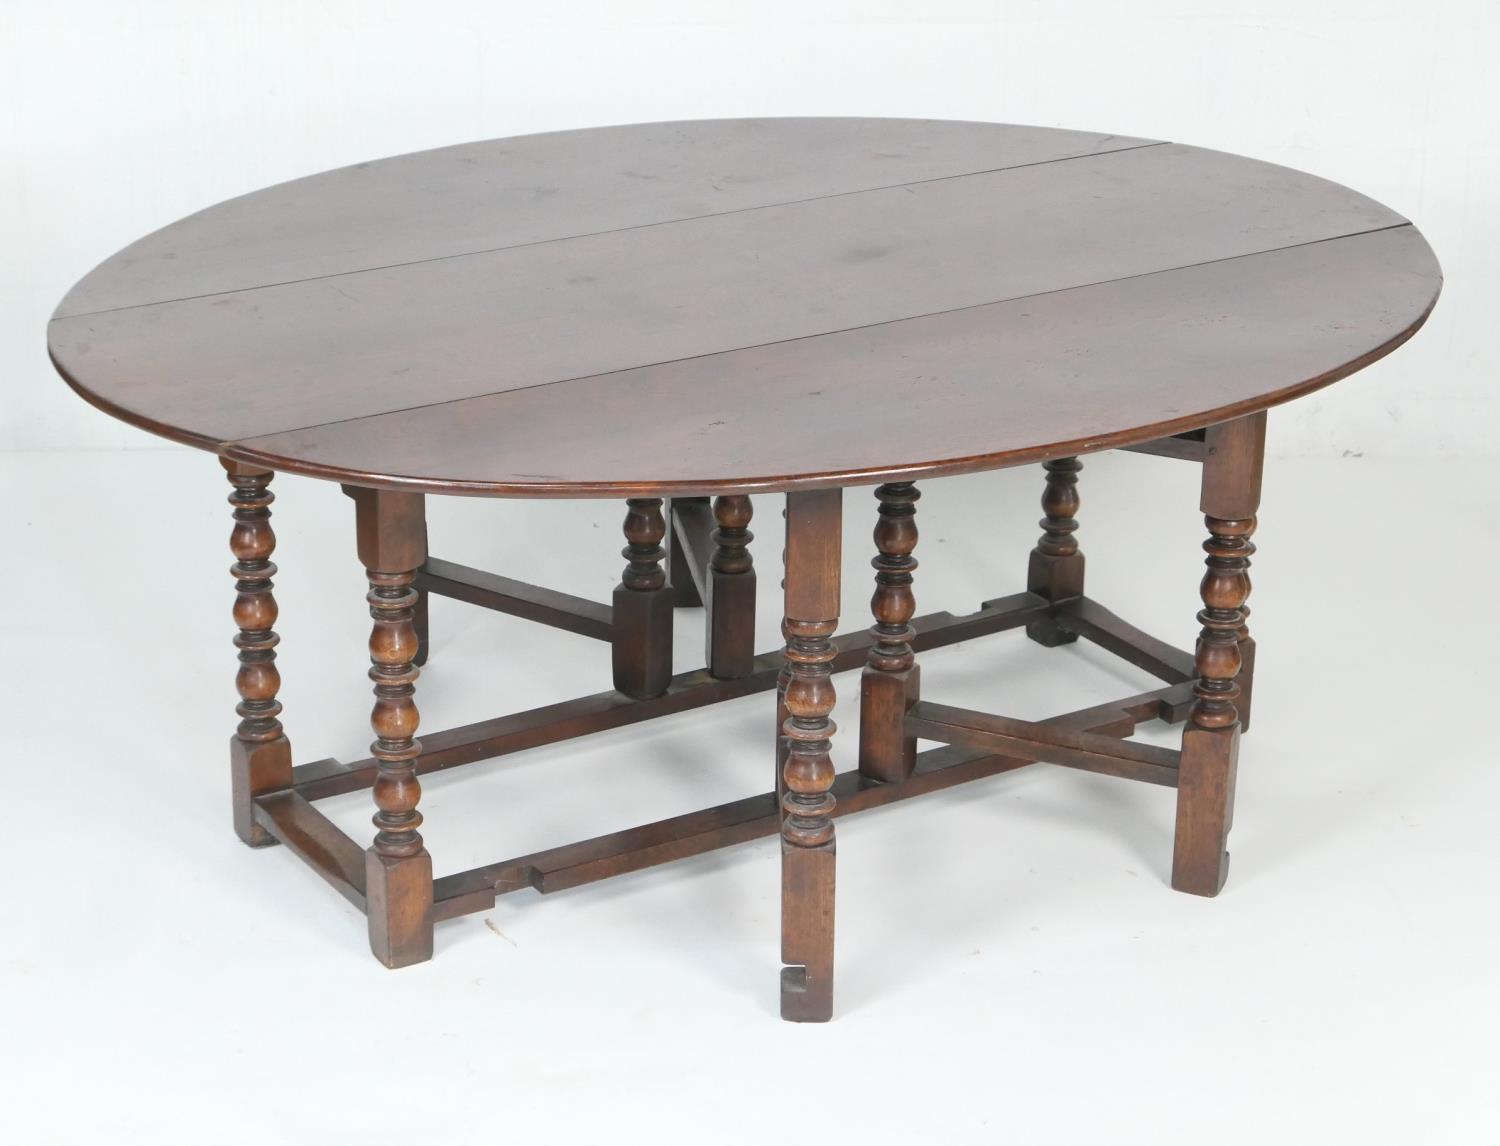 Quality large oak gateleg table in 18th Century style, the oval top with drop leaves supported on - Image 3 of 3